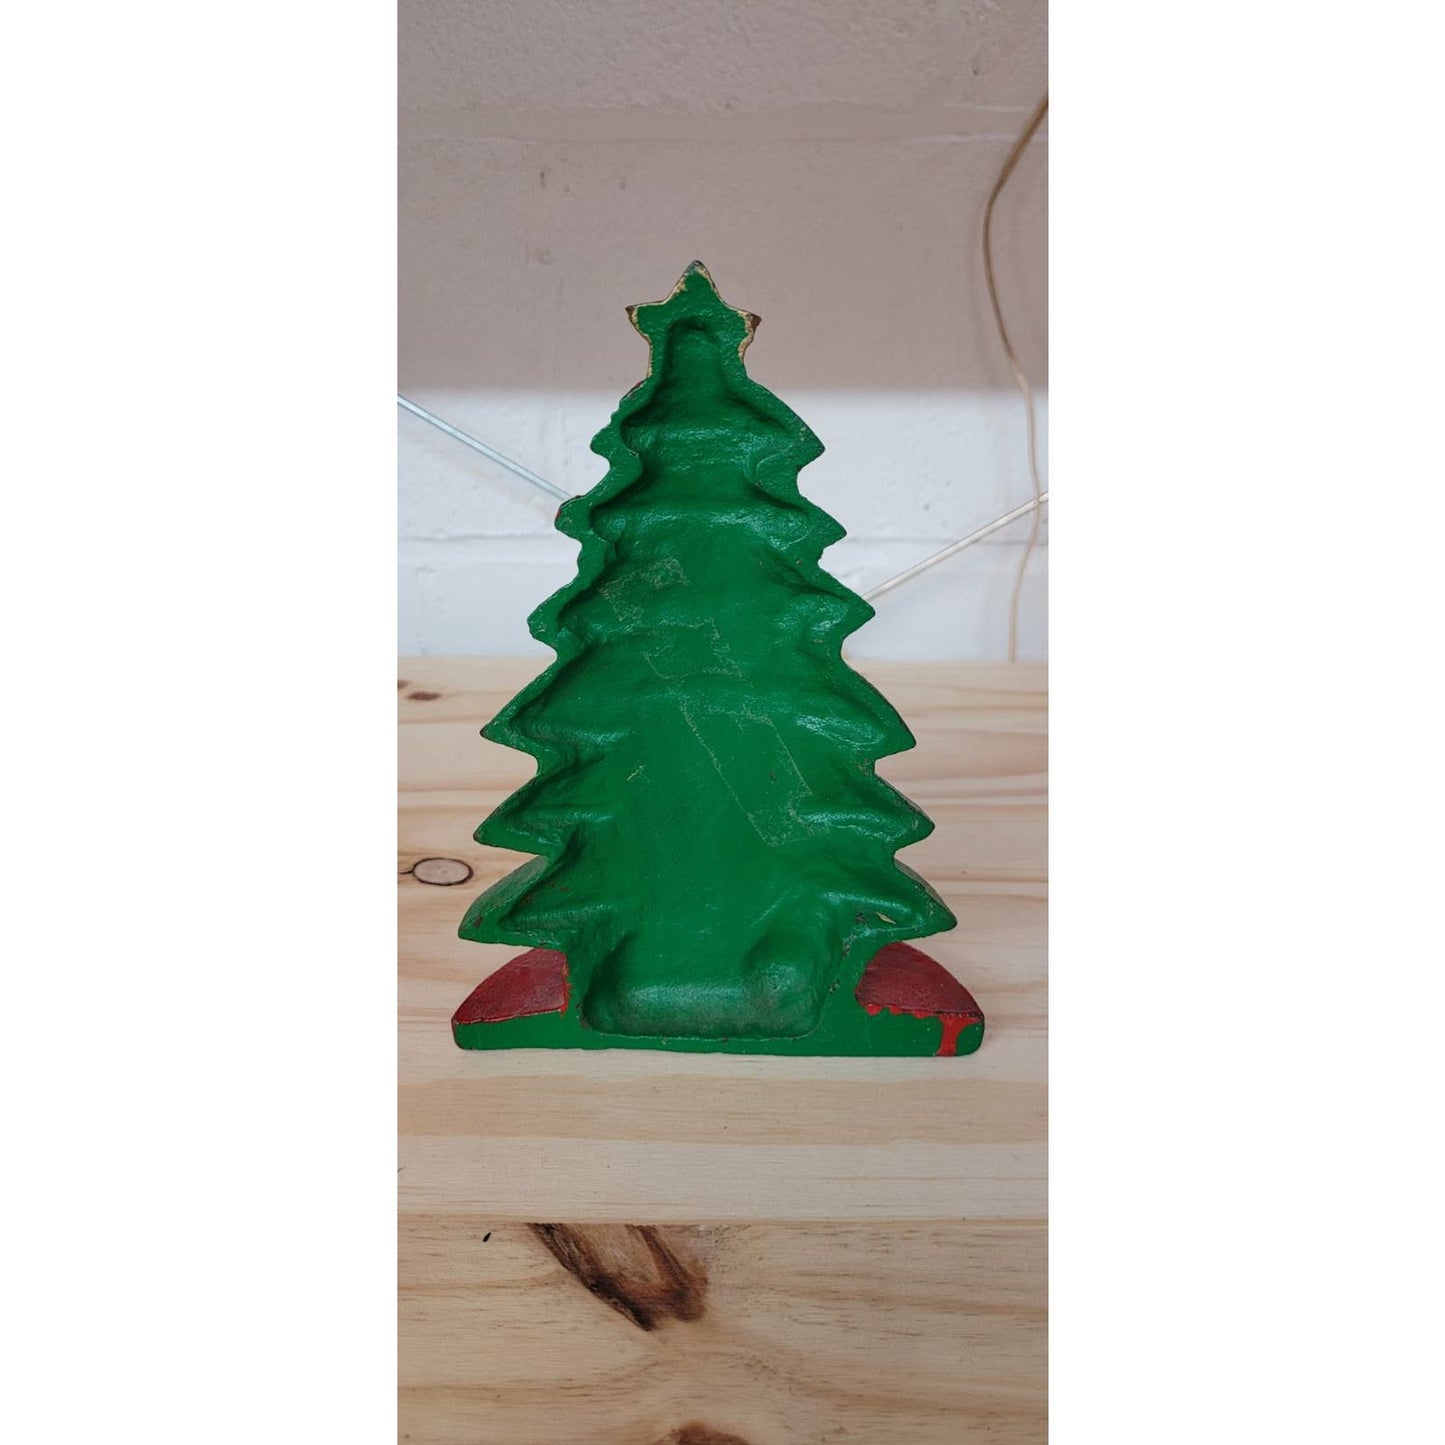 Vintage Cast Iron Christmas Tree Door Stop: Rustic Holiday Charm